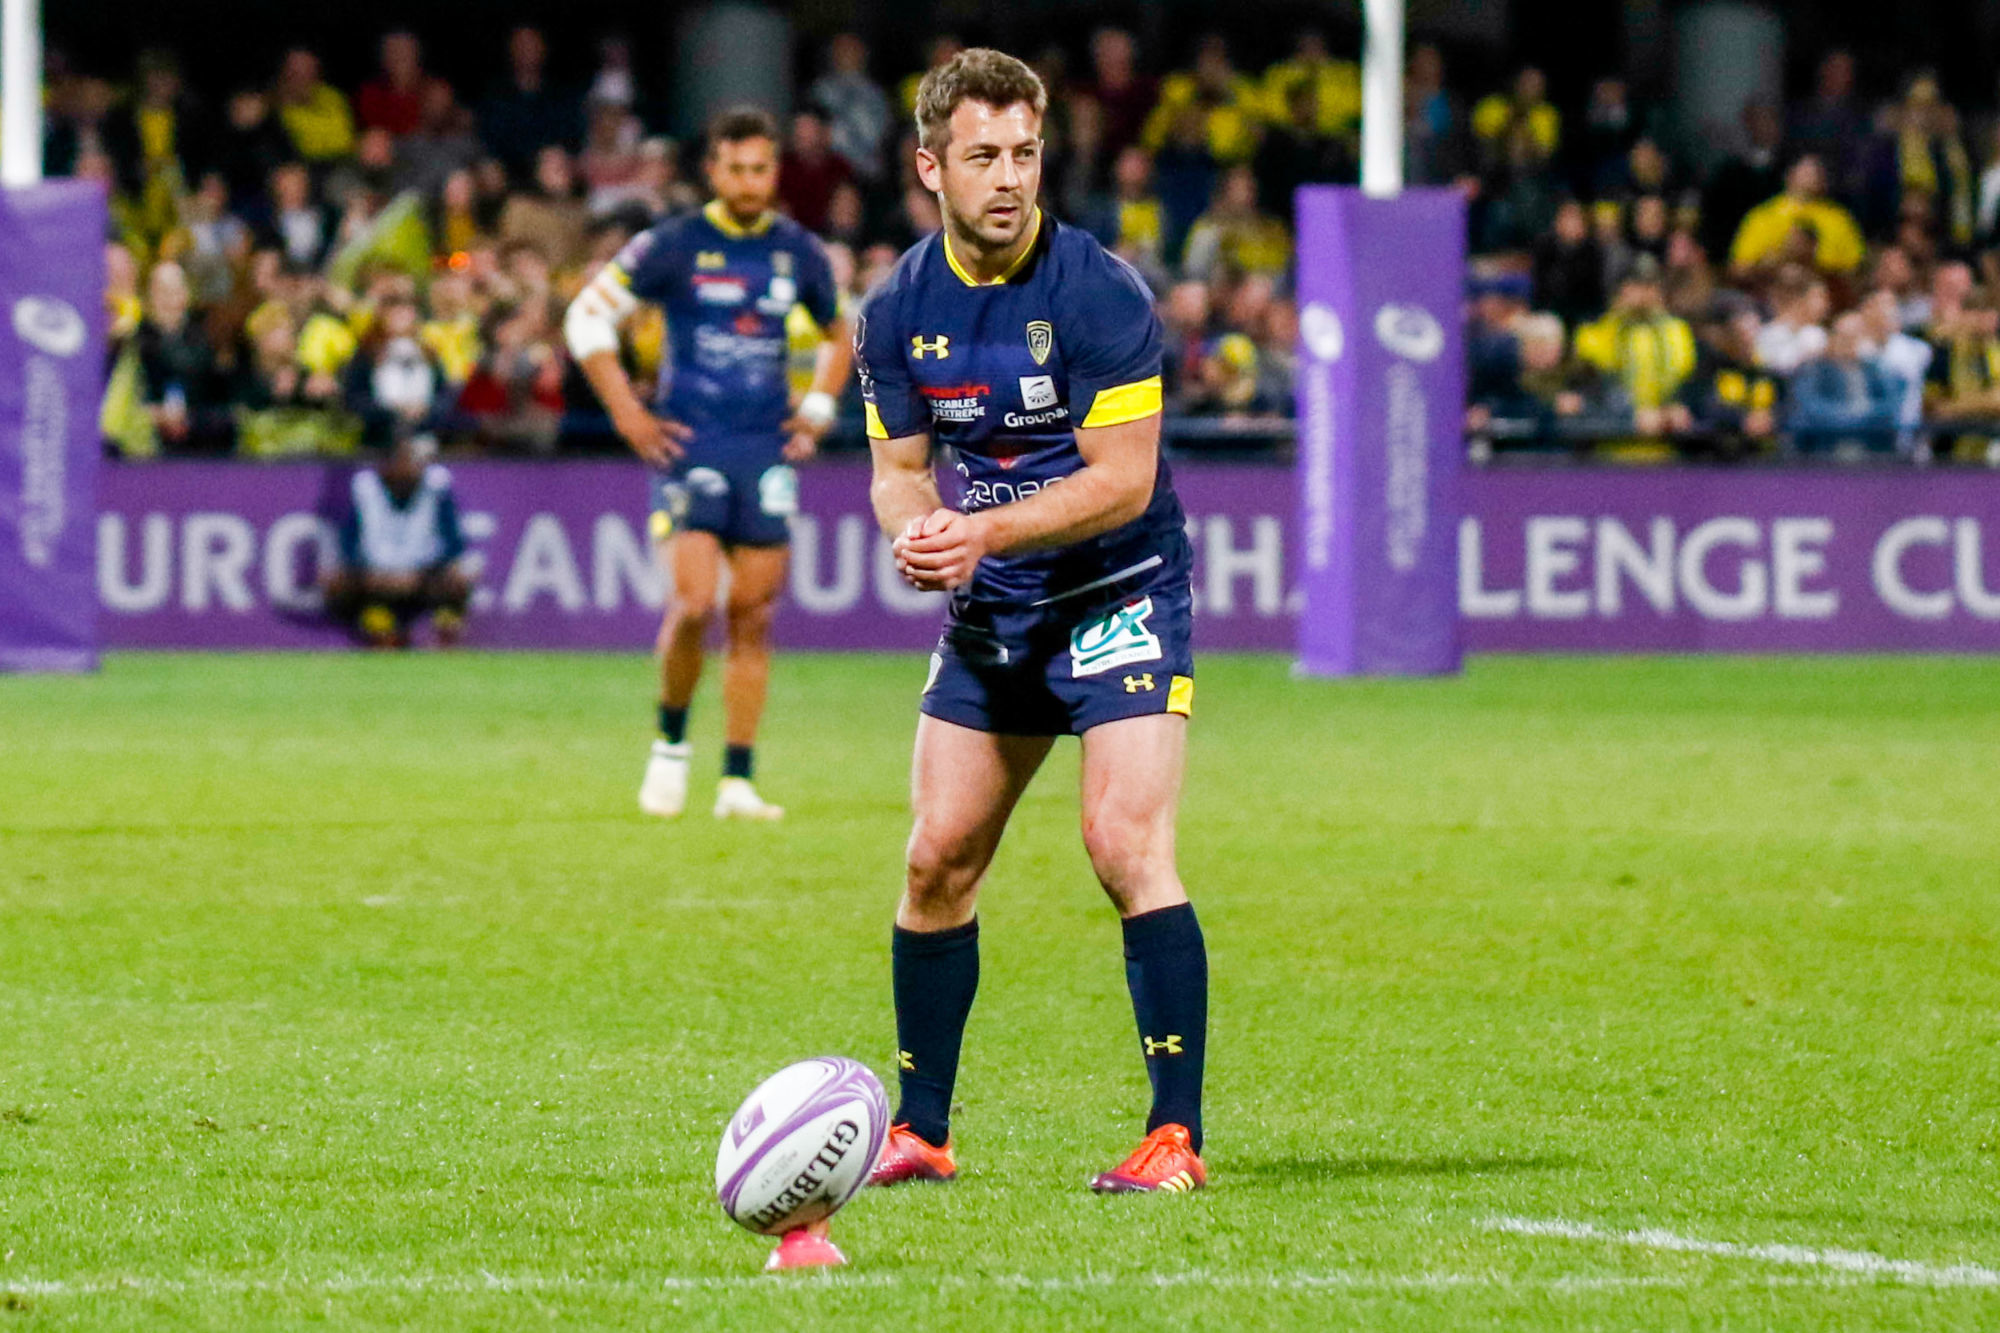 Greig Laidlaw of Clermont during the European Challenge Cup match between Clermont Ferrand and Northampton Saints at Stade Marcel Michelin on March 31, 2019 in Clermont-Ferrand, France. (Photo by Romain Biard/Icon Sport)